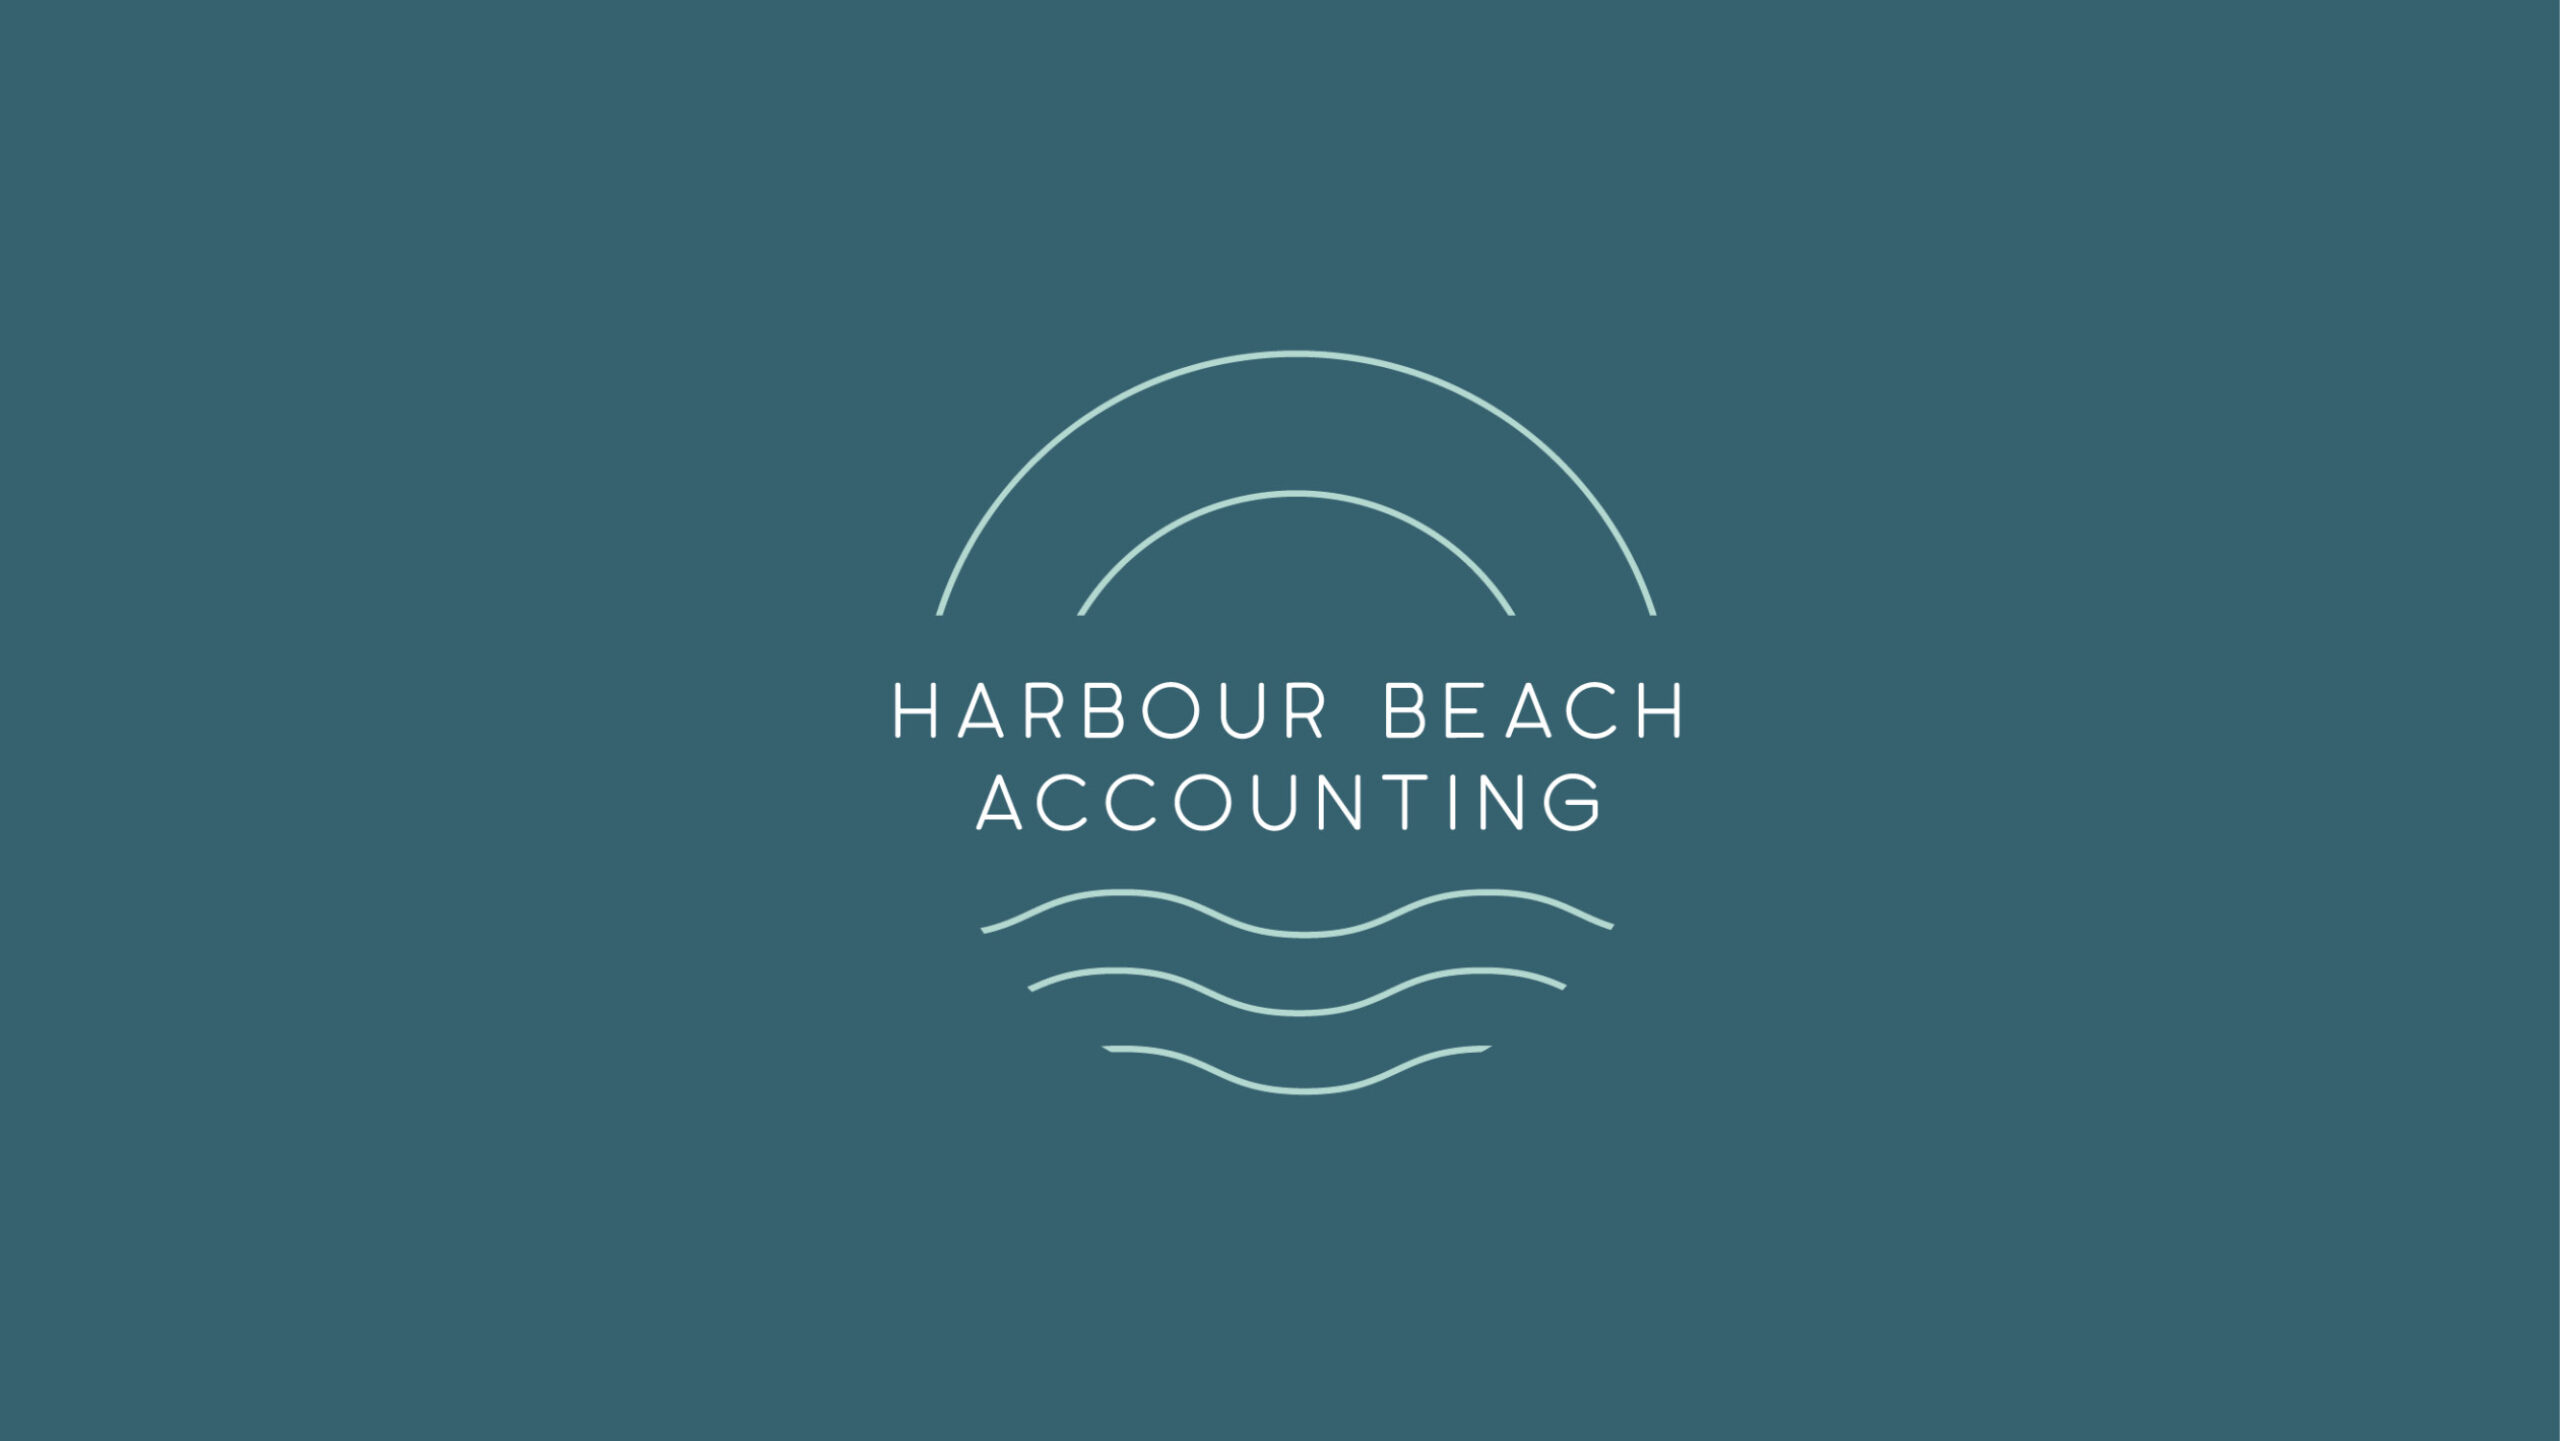 Harbour Beach Accounting Featured Image scaled